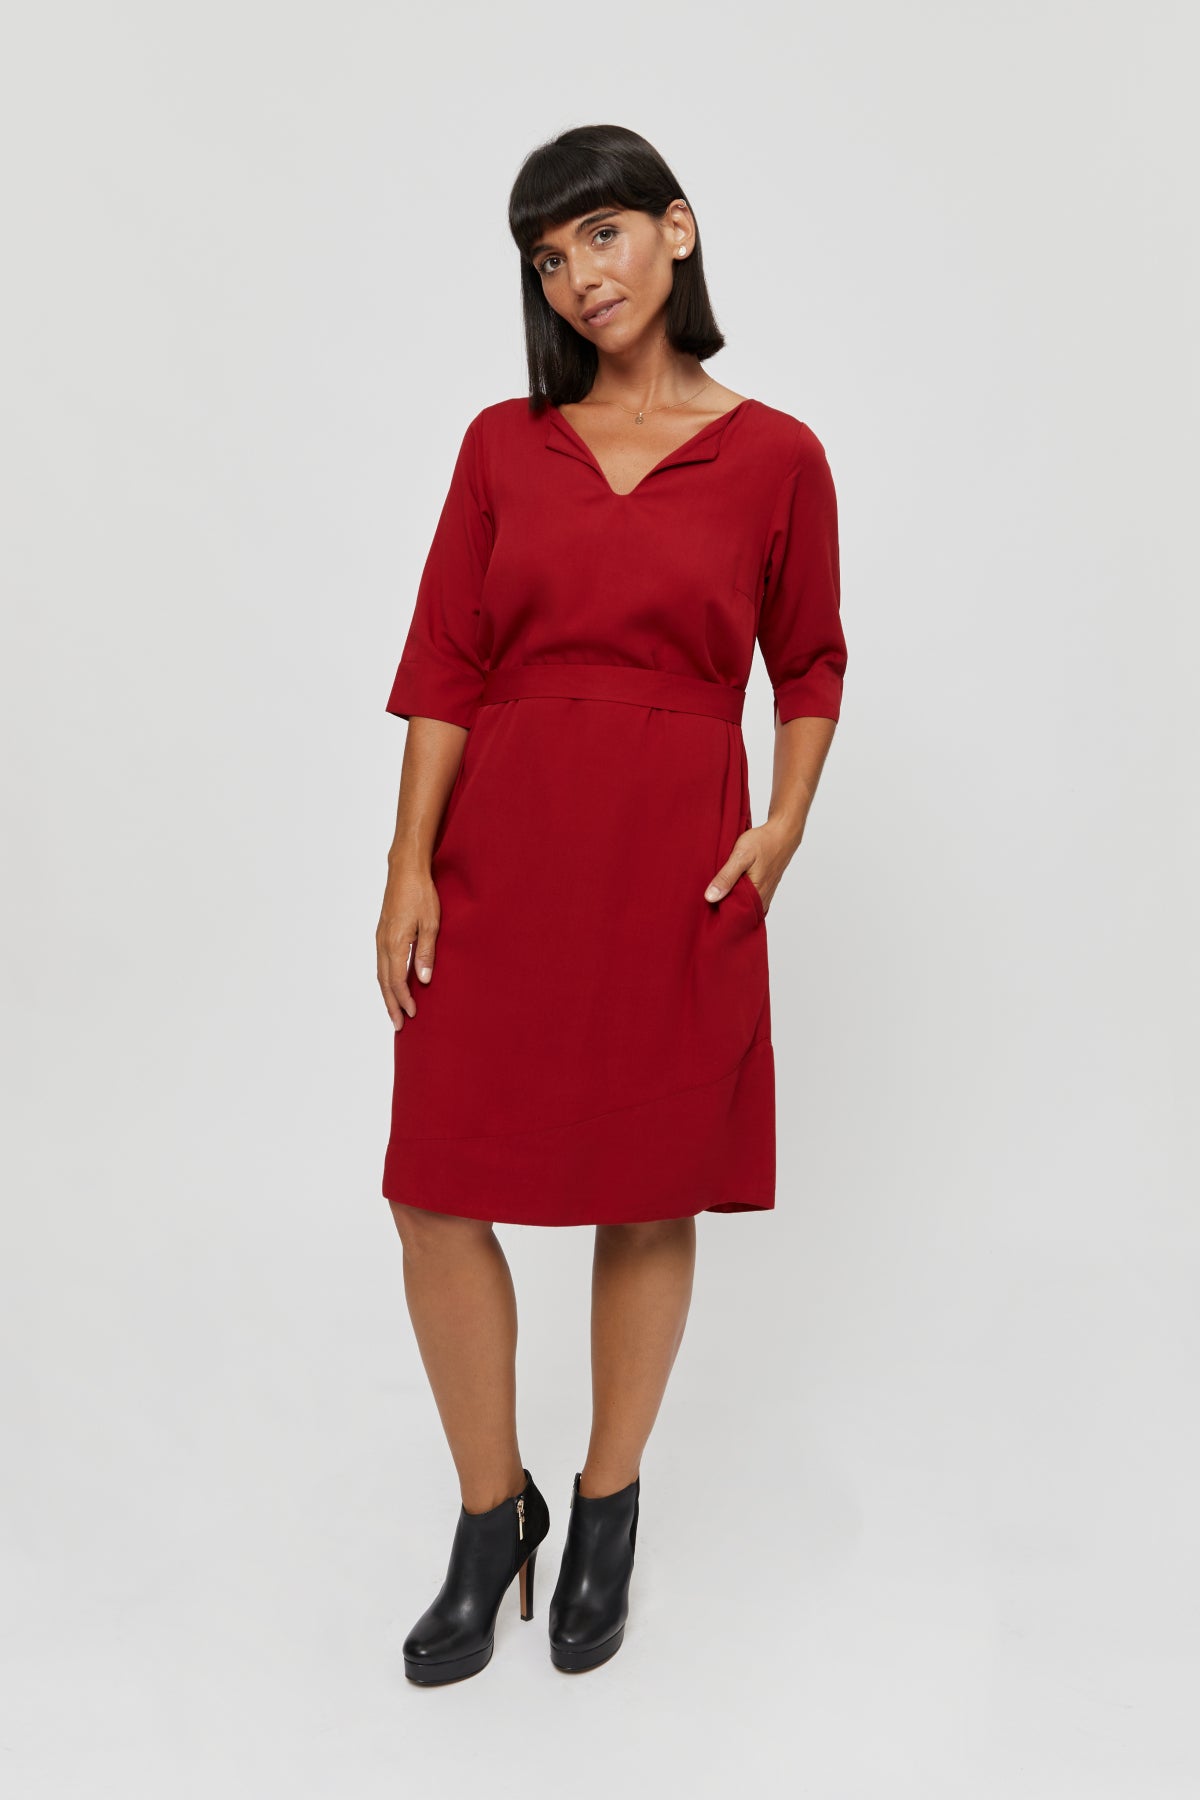 Red dress Catherine made of 100% viscose by Ayani